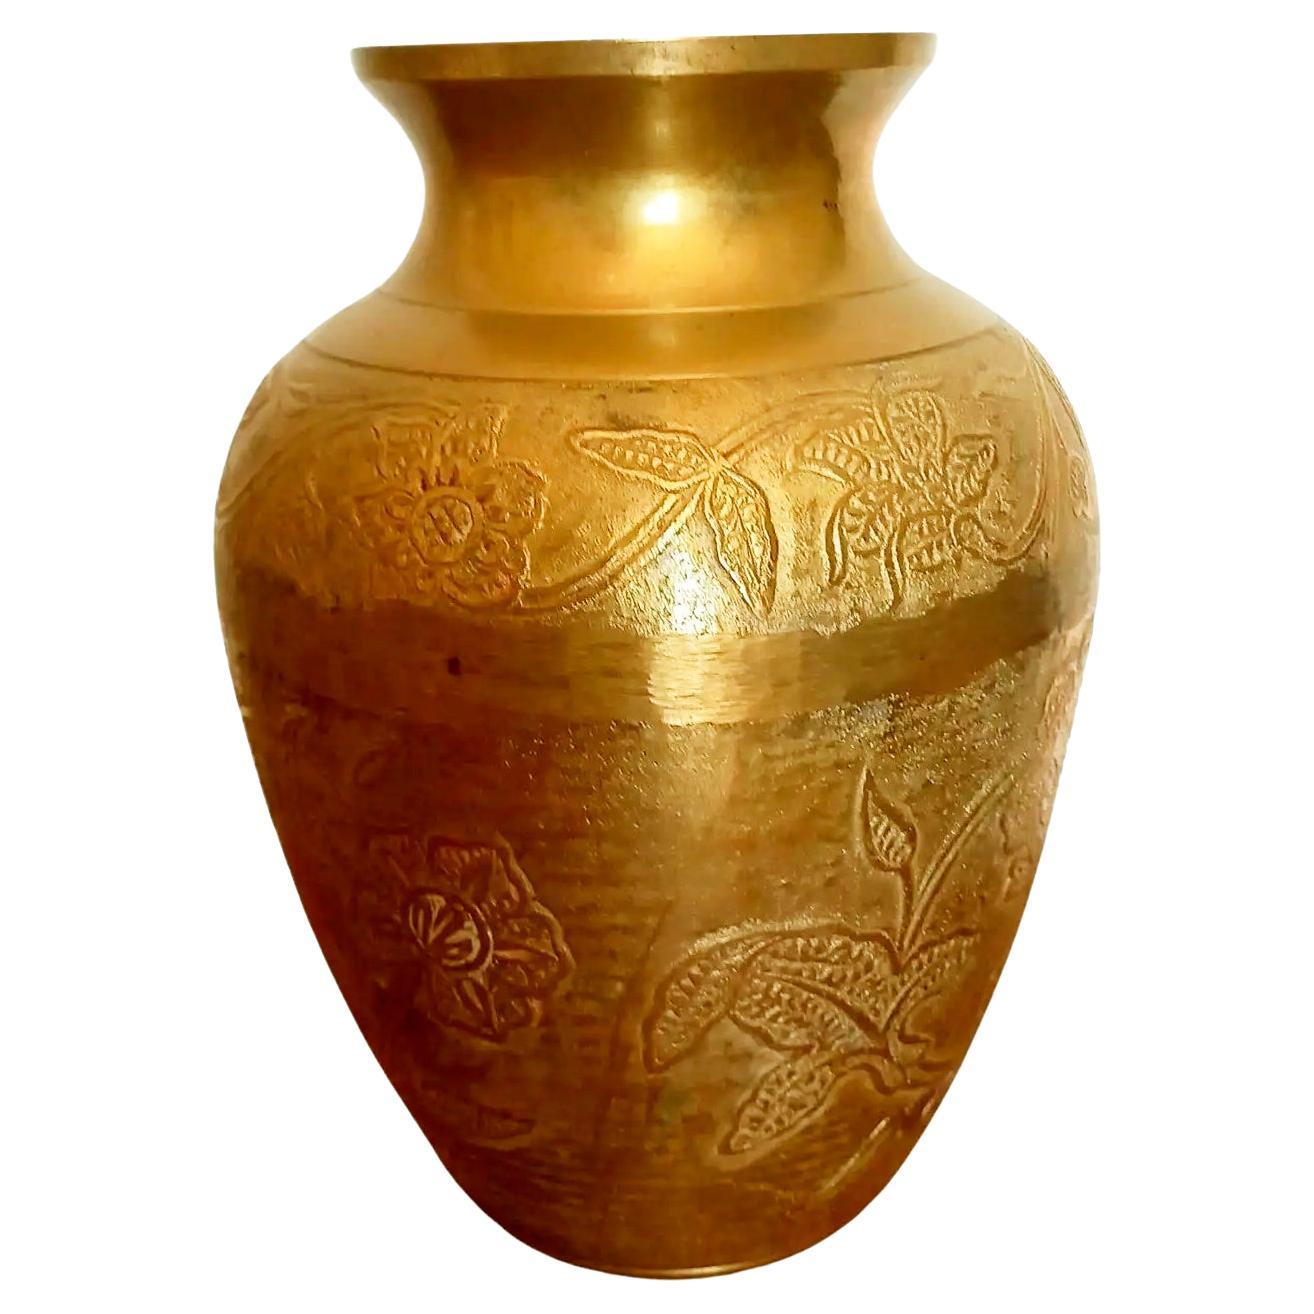  Brass Vase Classic Shape, with Carved Floral Filigree, Spain Early 20th Century